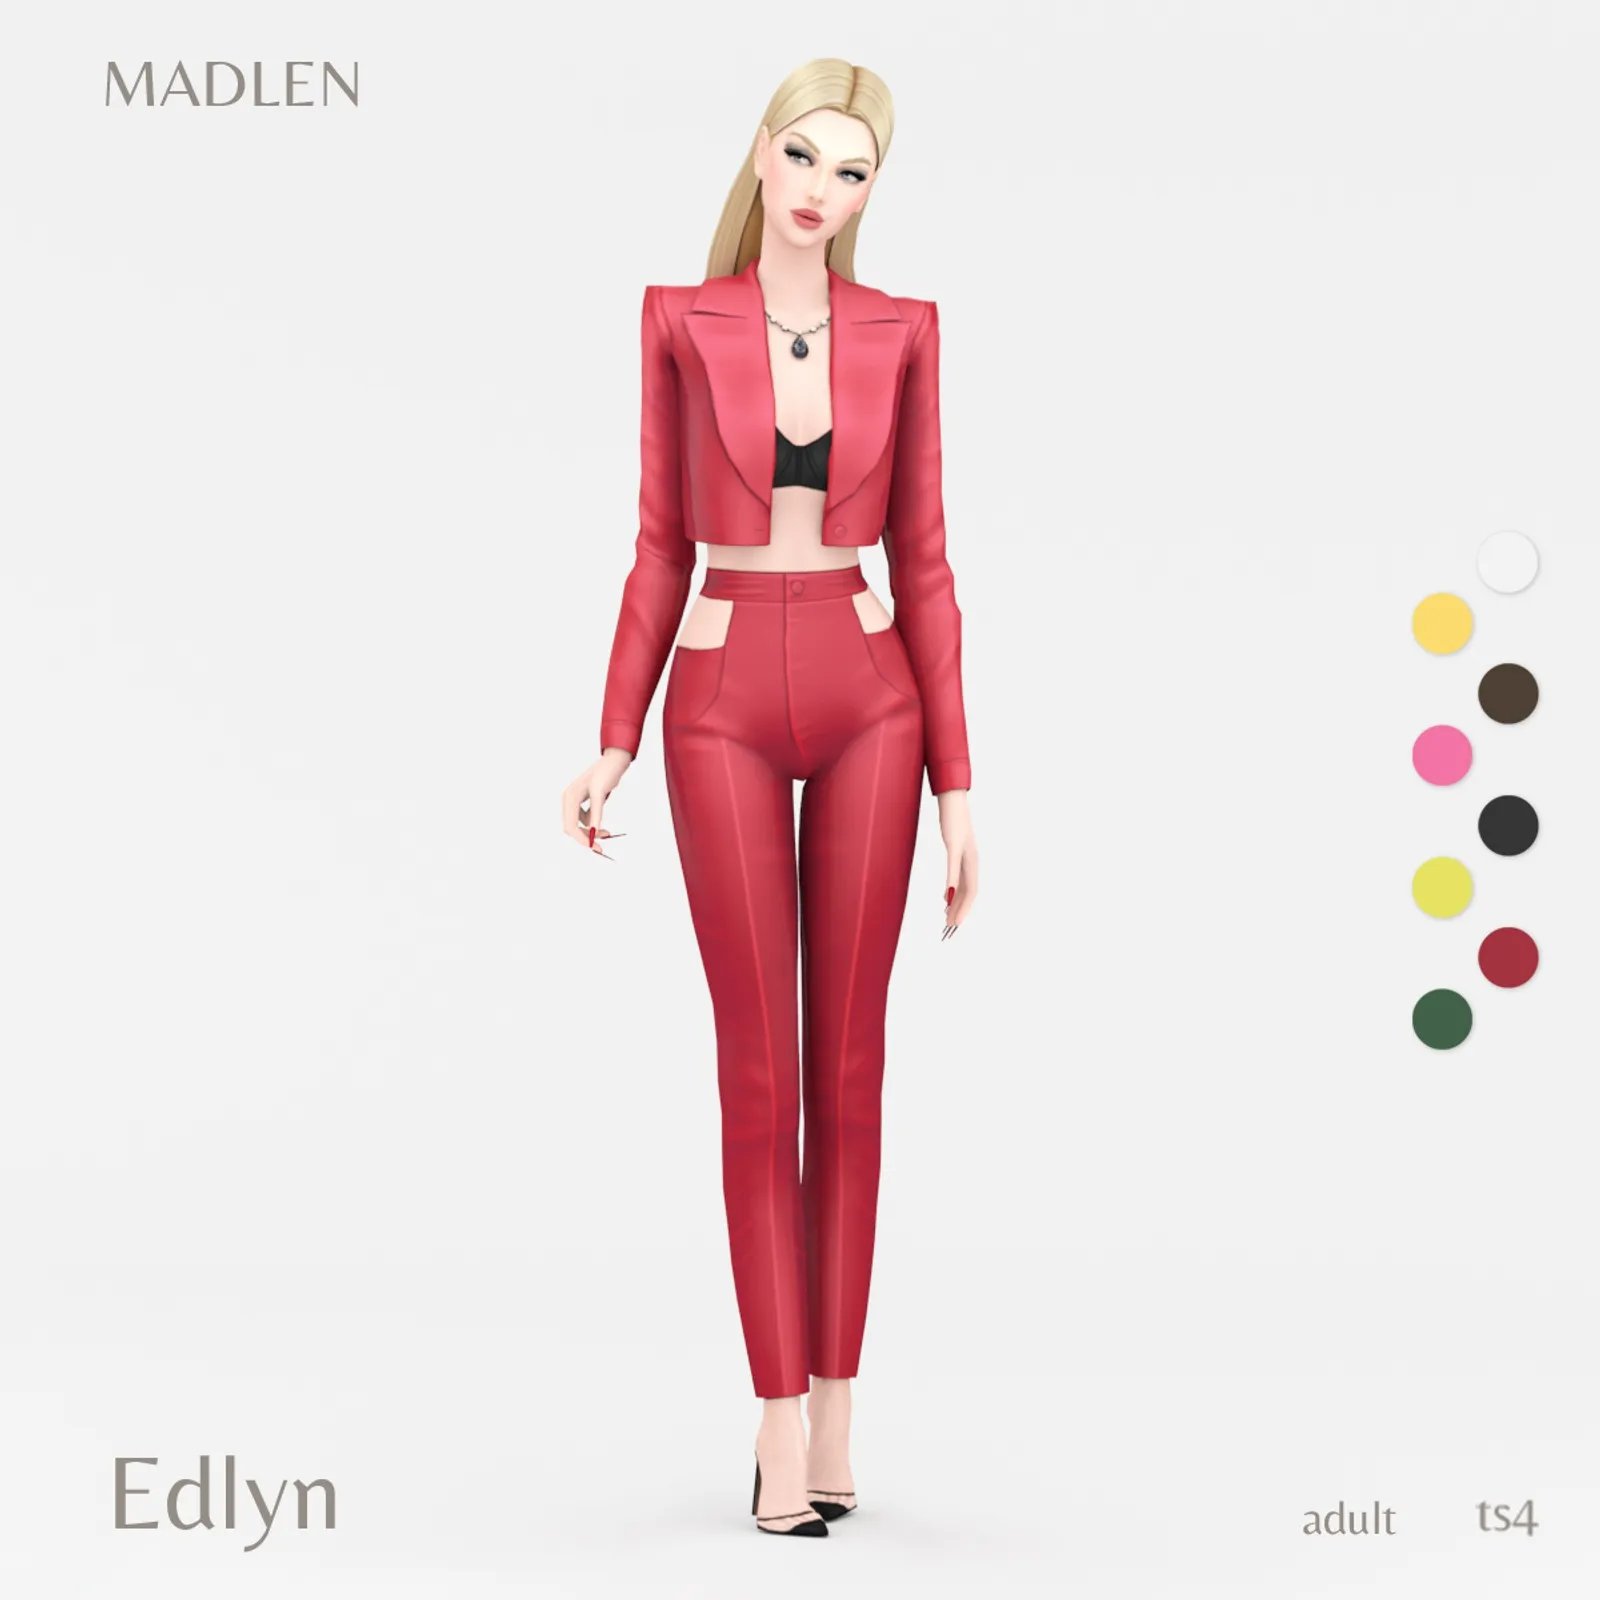 Edlyn Outfit